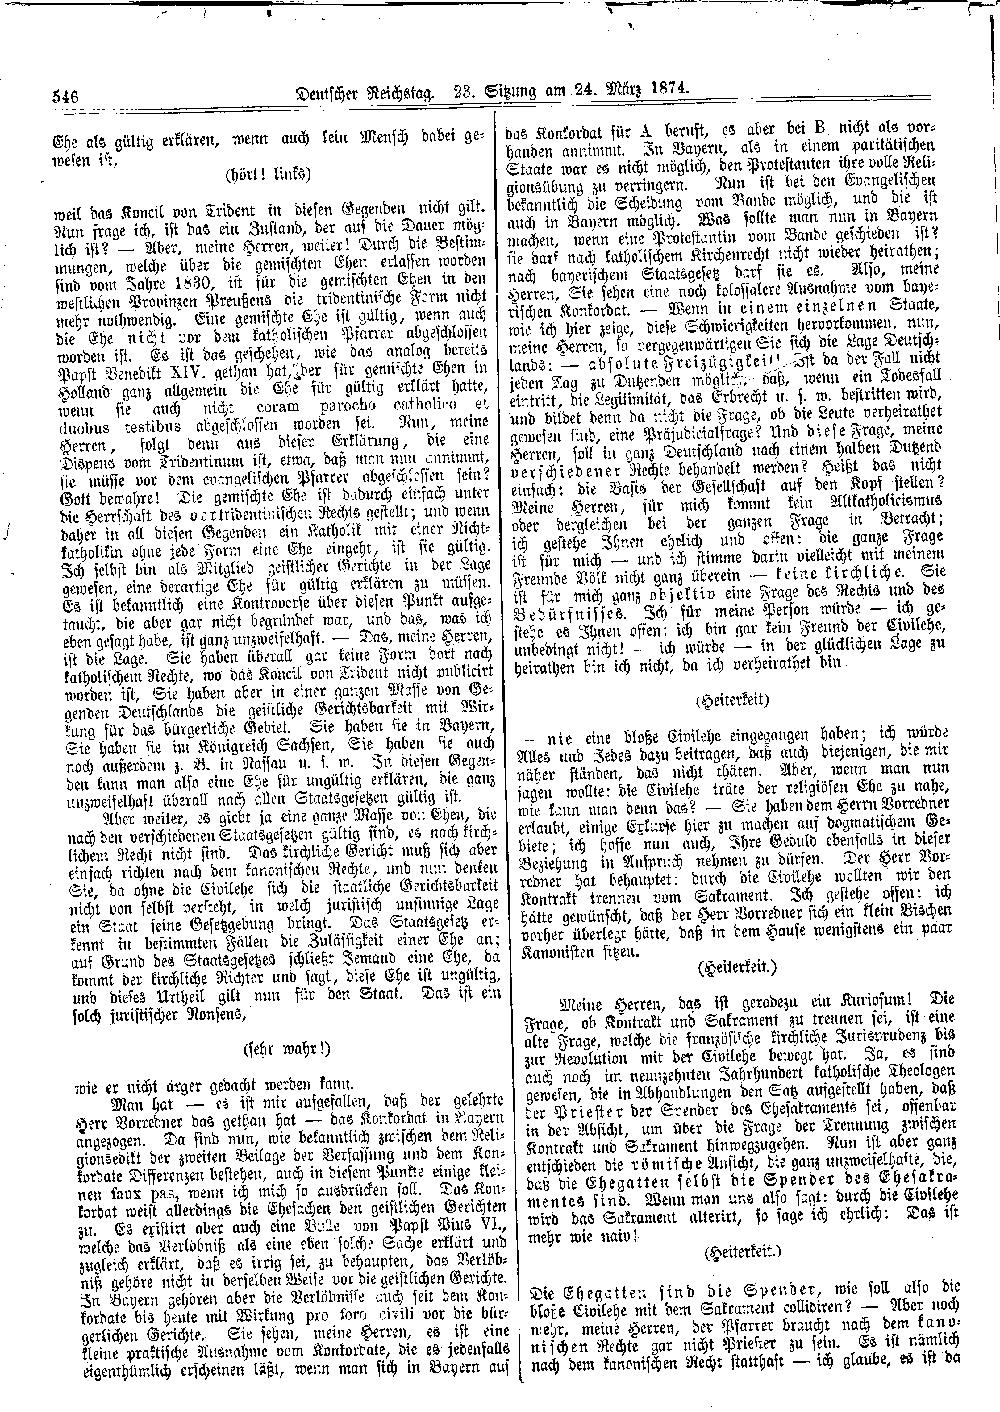 Scan of page 546